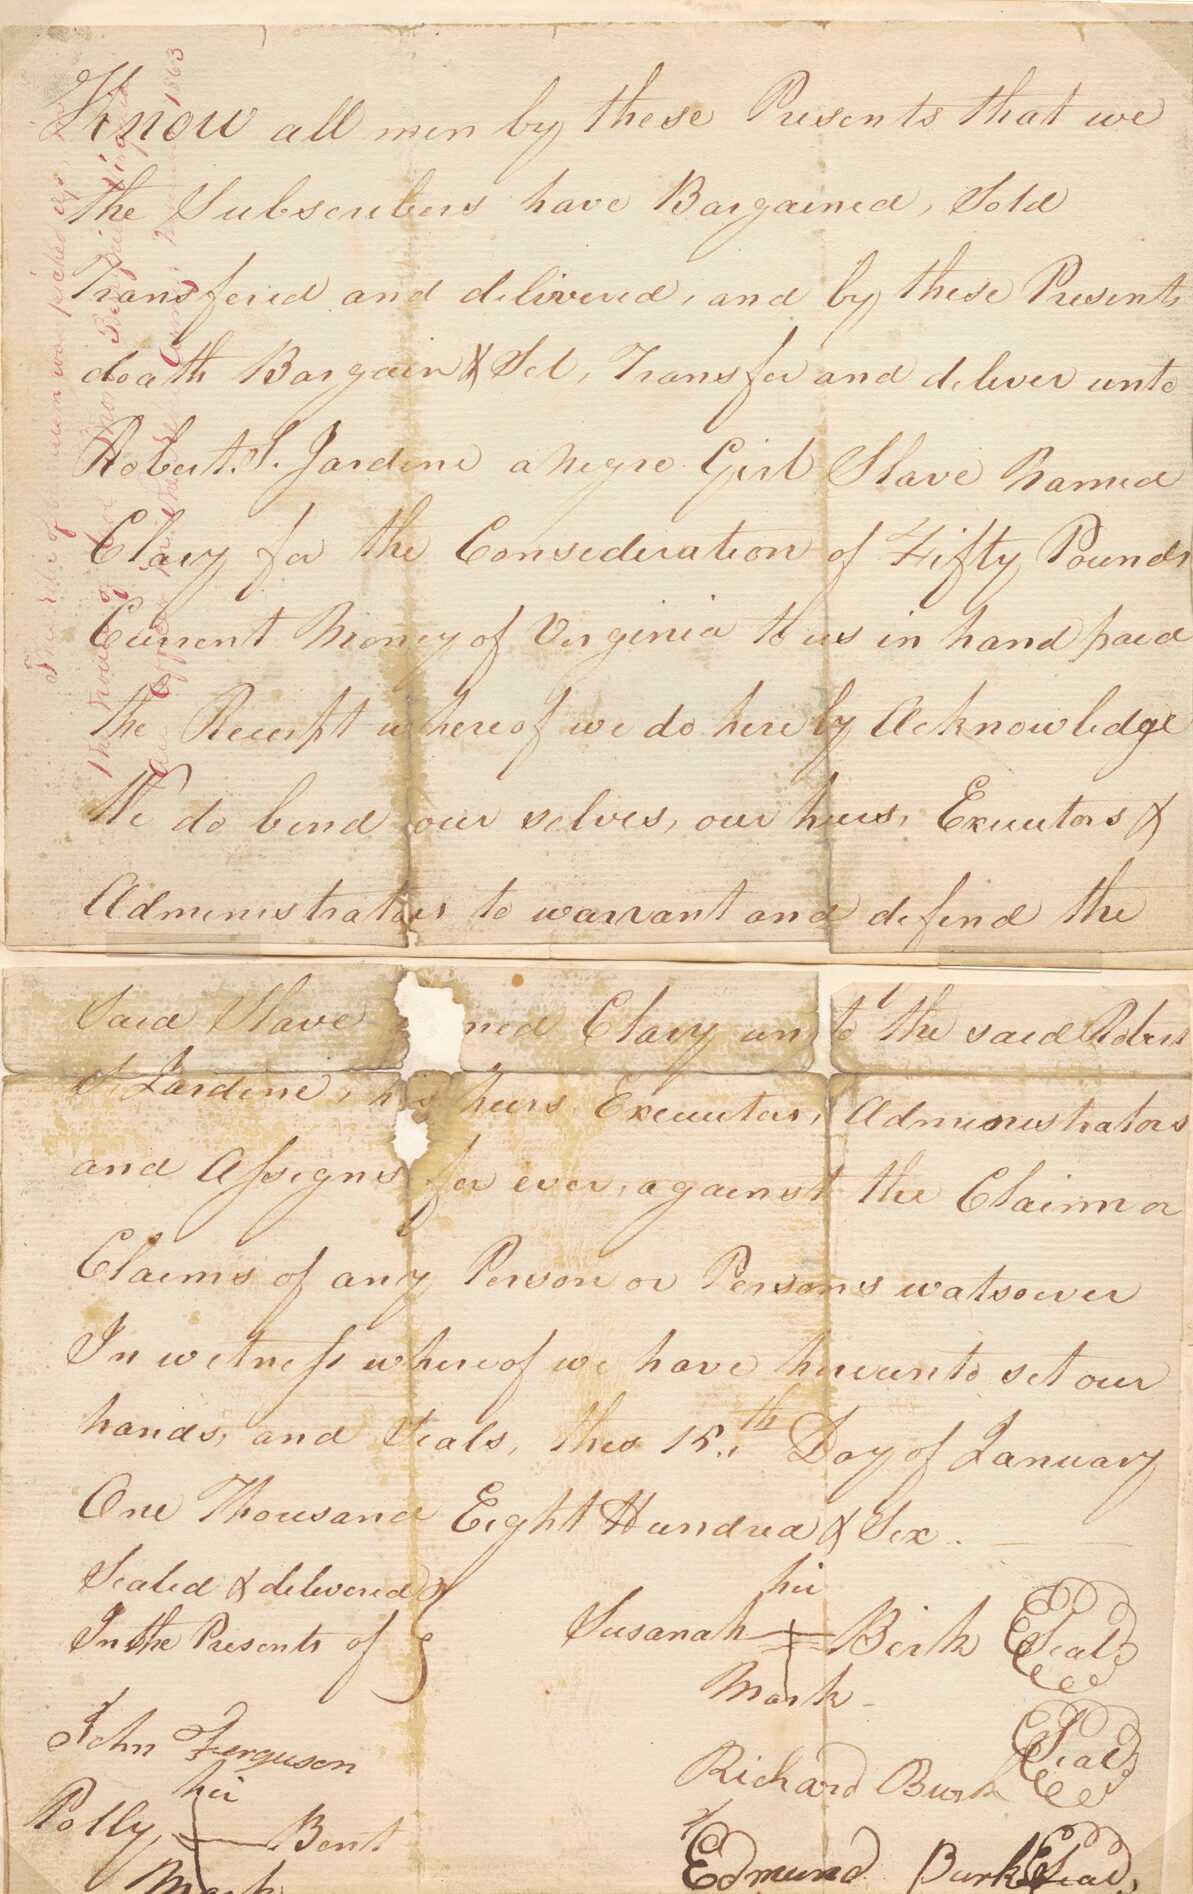 A bill of sale of an enslaved girl named Clary to Robert S. Jardine for the price of fifty pounds. The document is written on yellowed paper in brown colored ink. The document is severely creased and has several areas of loss at center along the creases. It is separated into two pieces. The two original pieces of paper are adhered to a newer piece of paper. The bill of sale begins with "Know all men by these Presents that we / the Subscribers have Bargained, sold, / Transferred and Delivered, and by these Presents / doath Bargain Sel, Transfer and deliver unto / Robert S. Jardine a negro girl named / Clary for the Consideration of Fifty Pounds / Current Money of Virginia…” the document has the names of sellers and witnesses written at the bottom. Additional writing is written vertically in red ink on the upper left corner: “This relic of barbarism was picked up in the travels of Col. Thom Berryhill[2] Virginia All offices in the rebel Army, November 1863.”